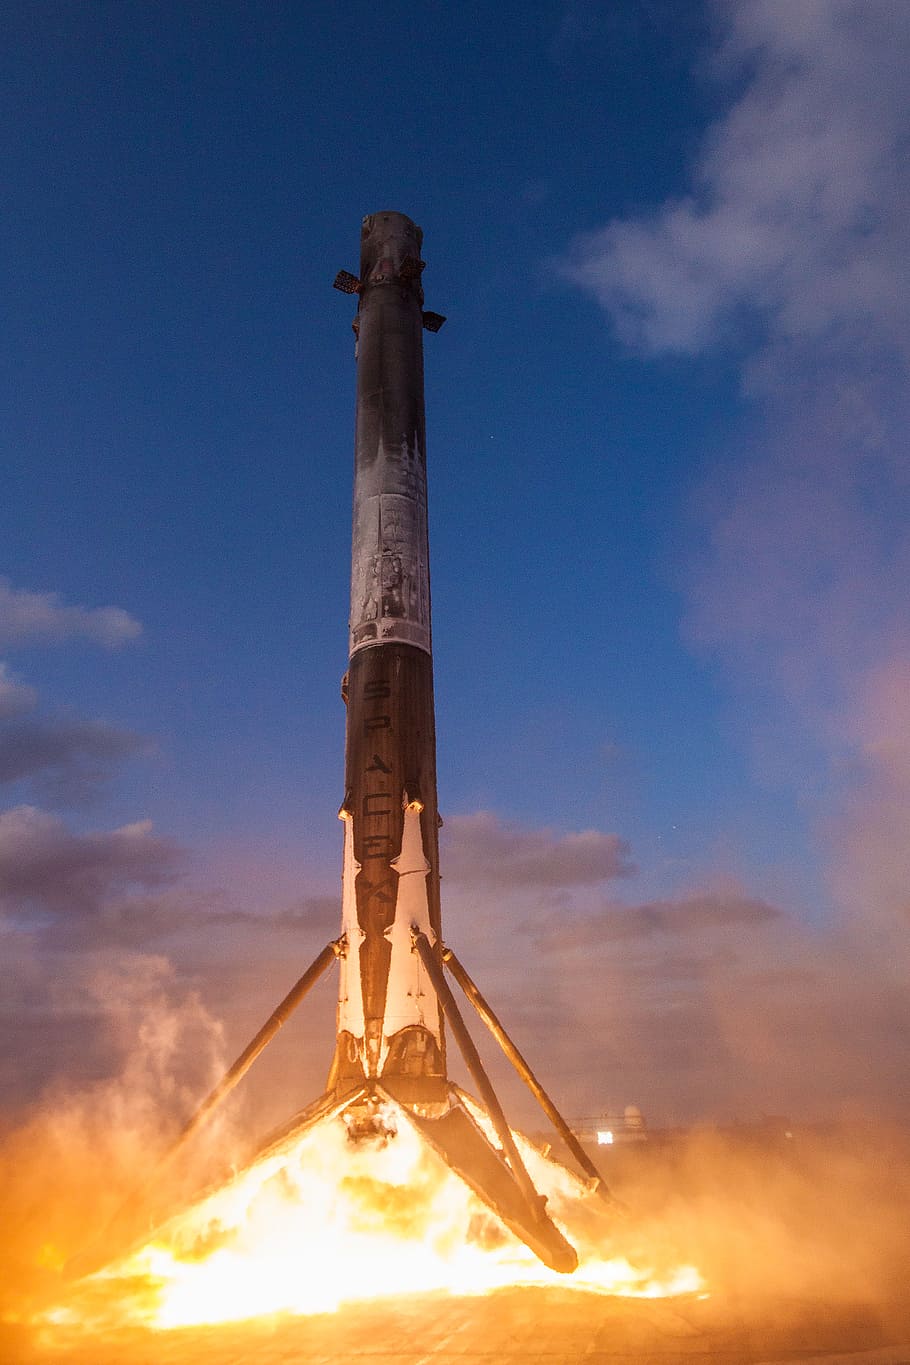 SES, Mission, Falcon 9, First, Landing, rocket launched at daytime, sky, cloud - sky, low angle view, blue